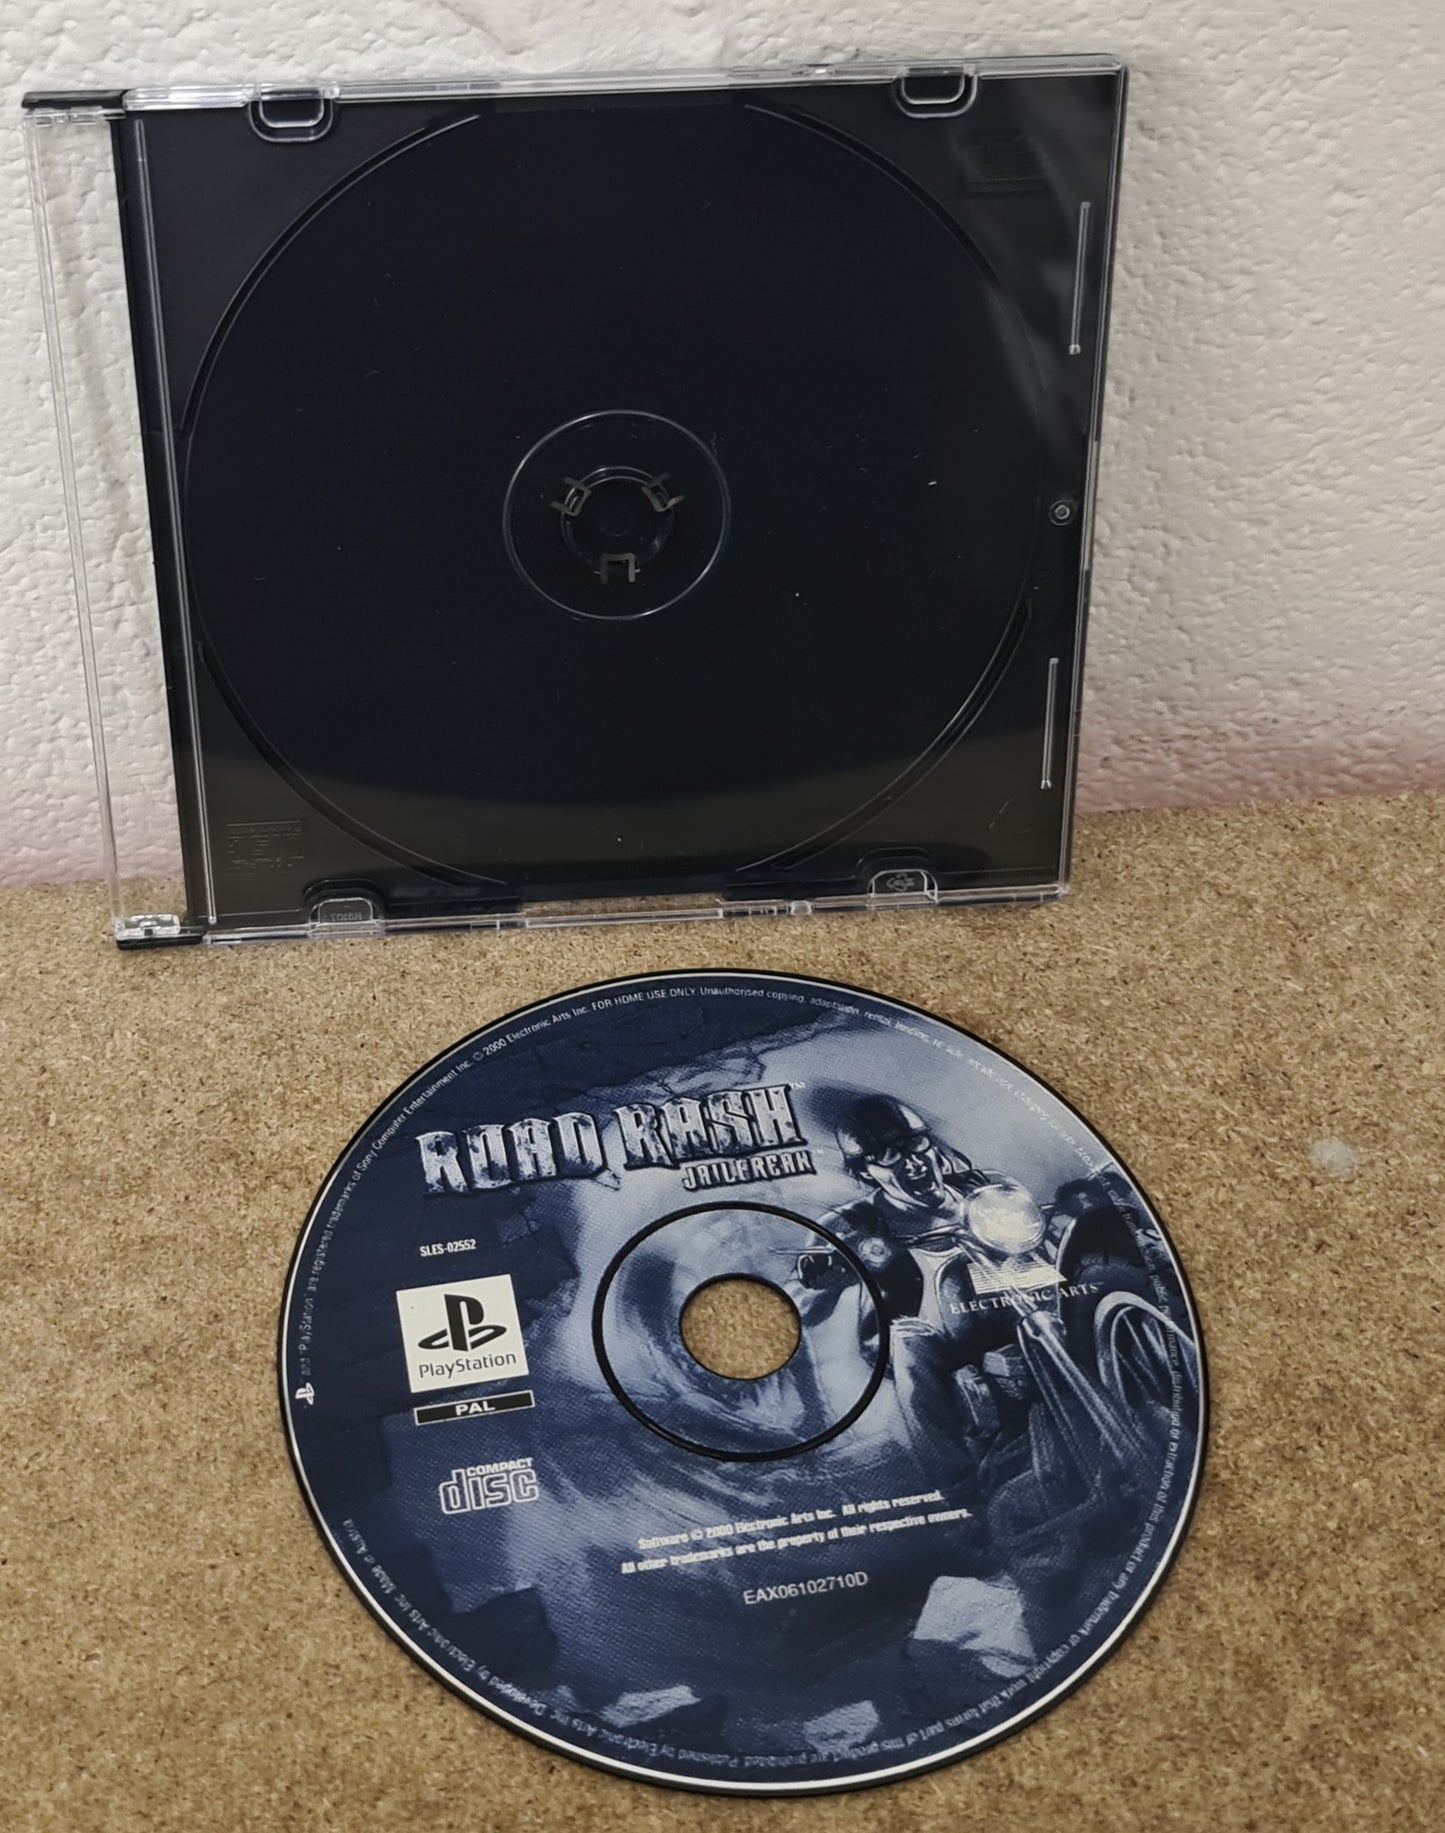 Road Rash Jailbreak Sony Playstation 1 (PS1) Game Disc Only